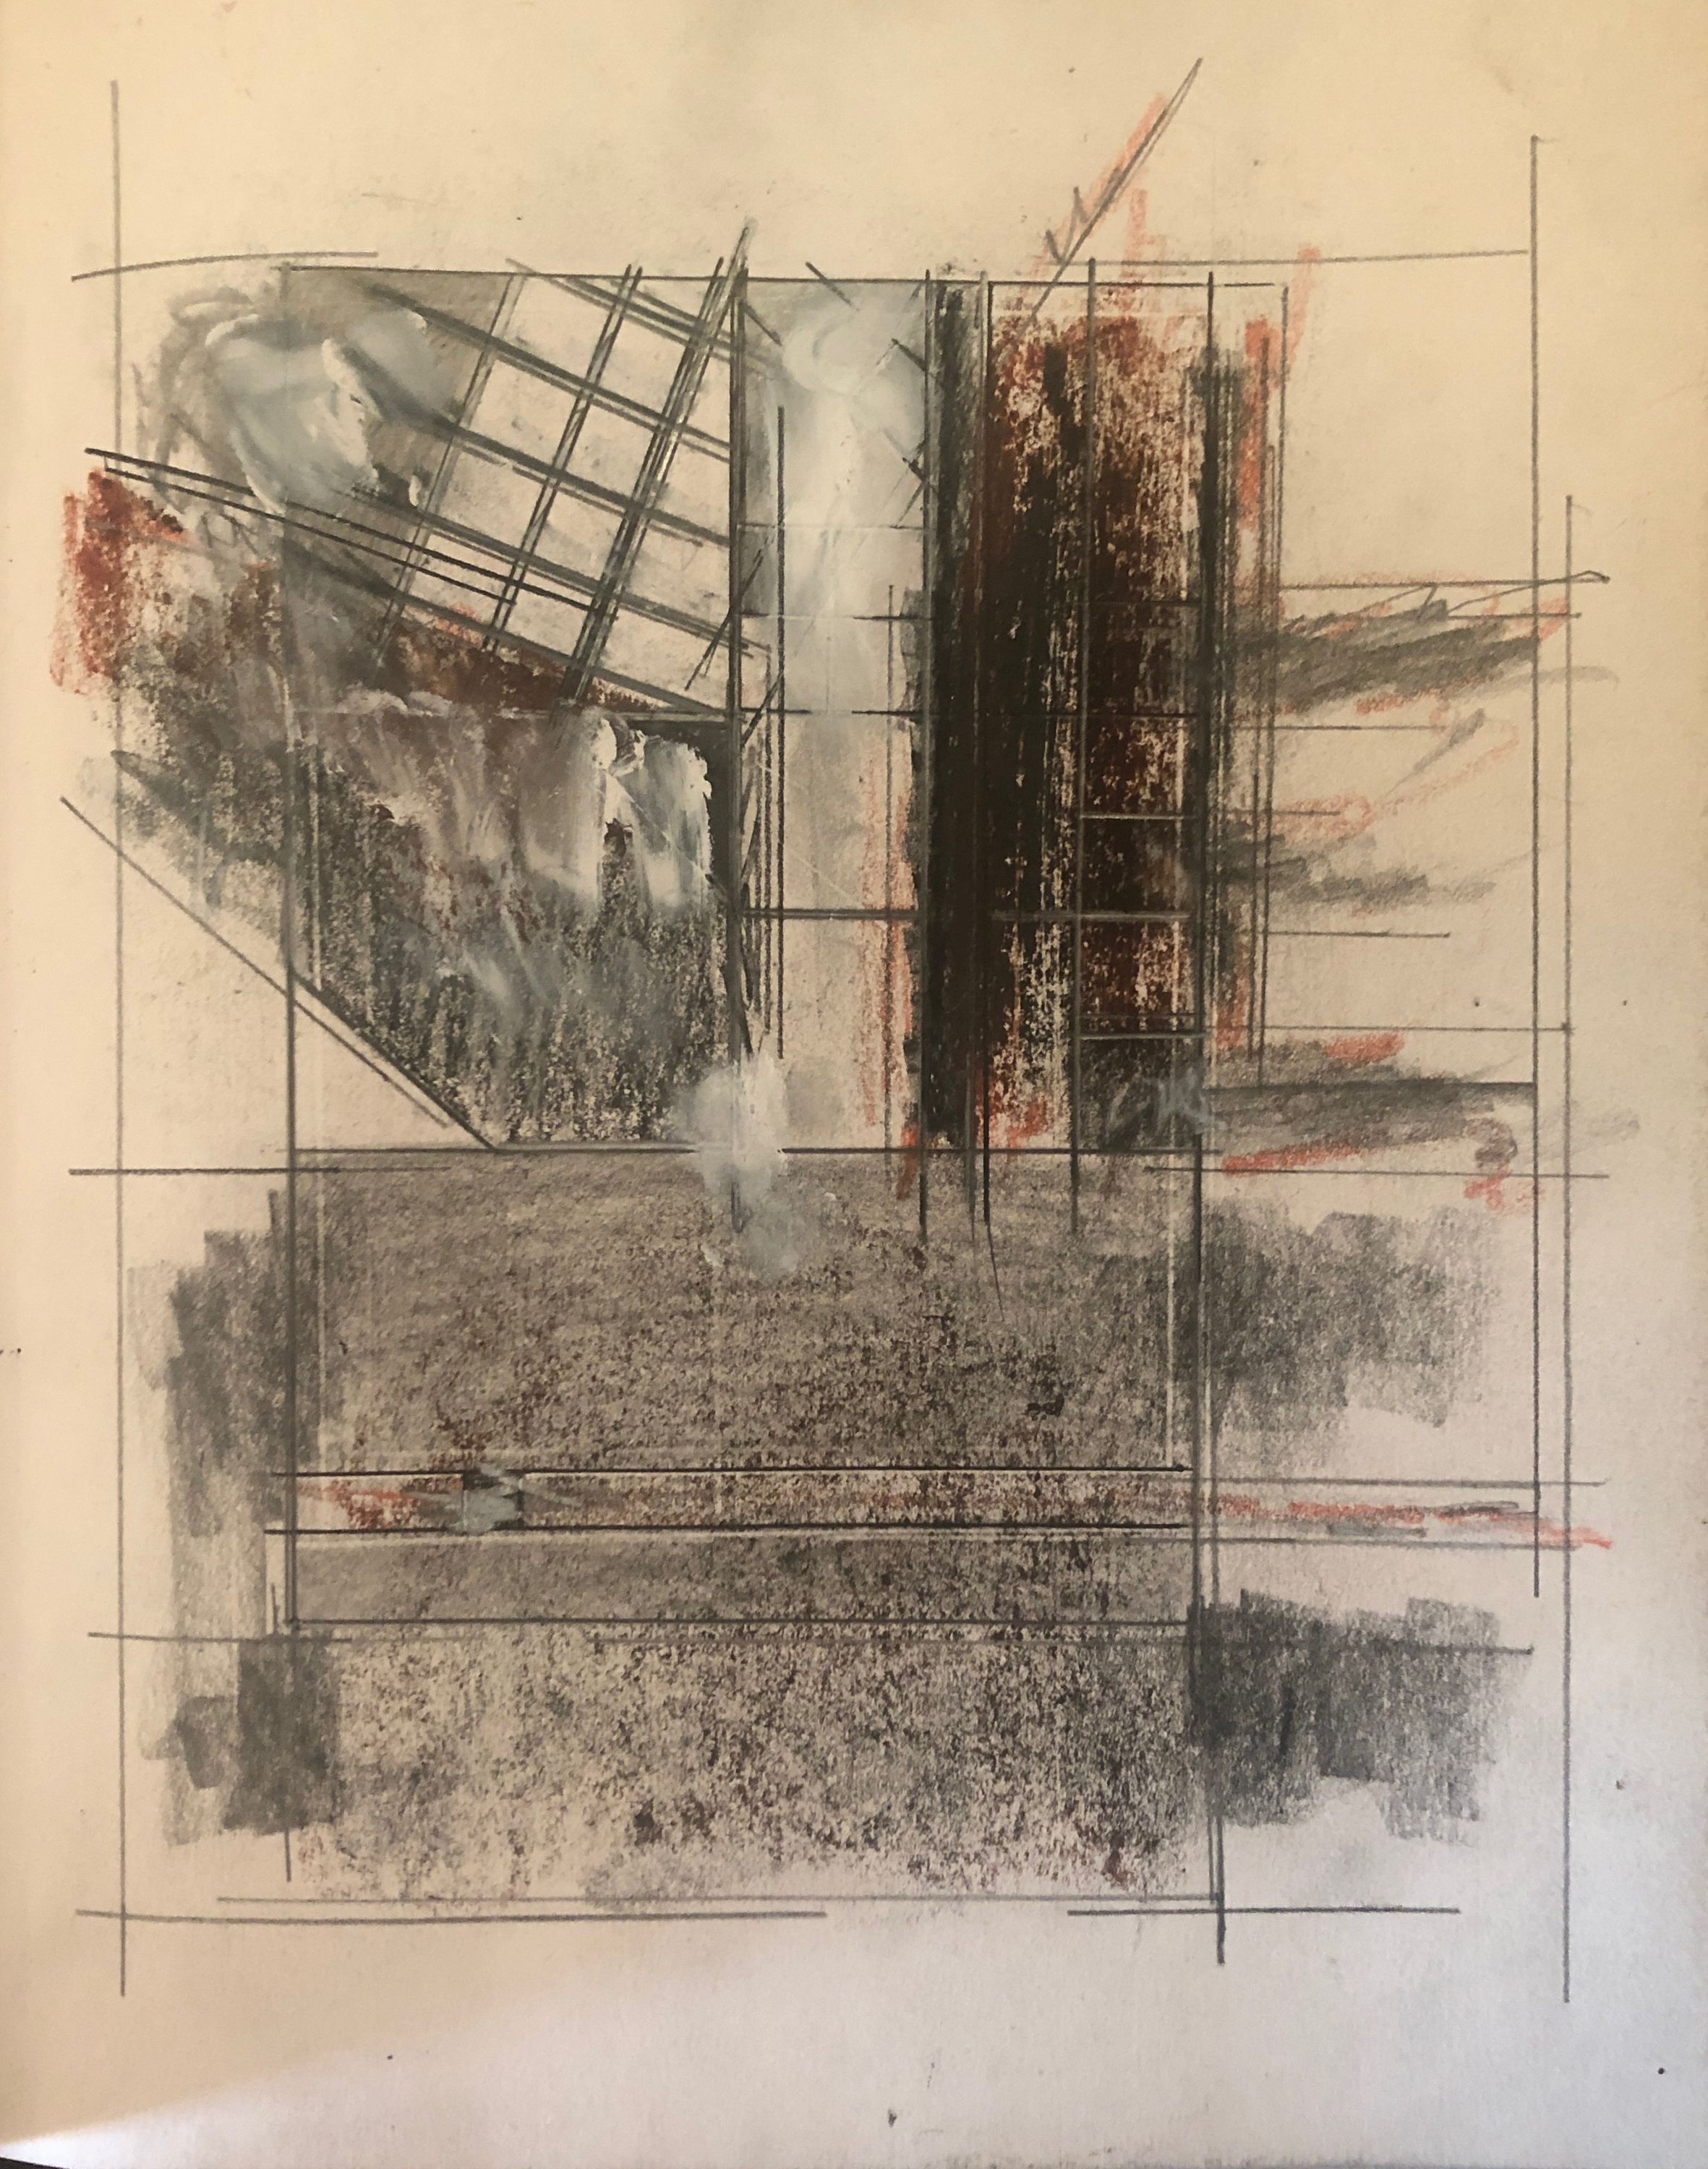 STUDY for a PAINTING  1977